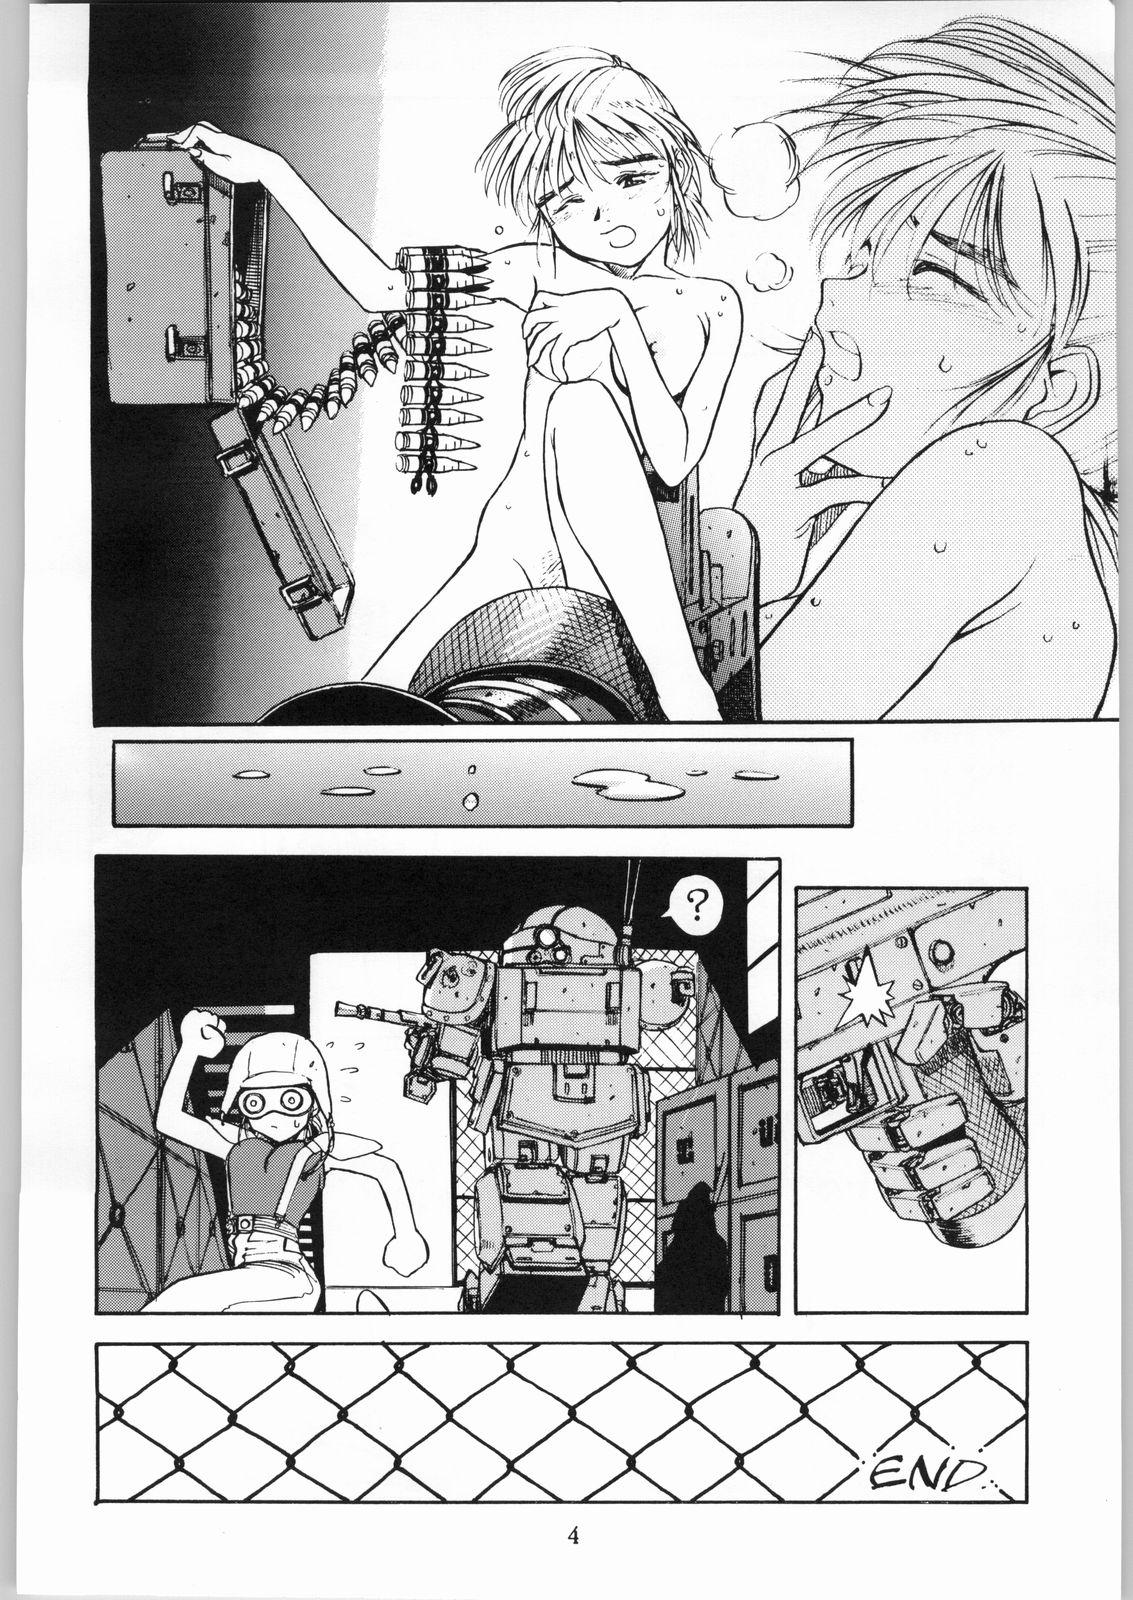 Amazing Kanojo No Juu - Final fantasy vii Ghost in the shell Step Dad - Page 5